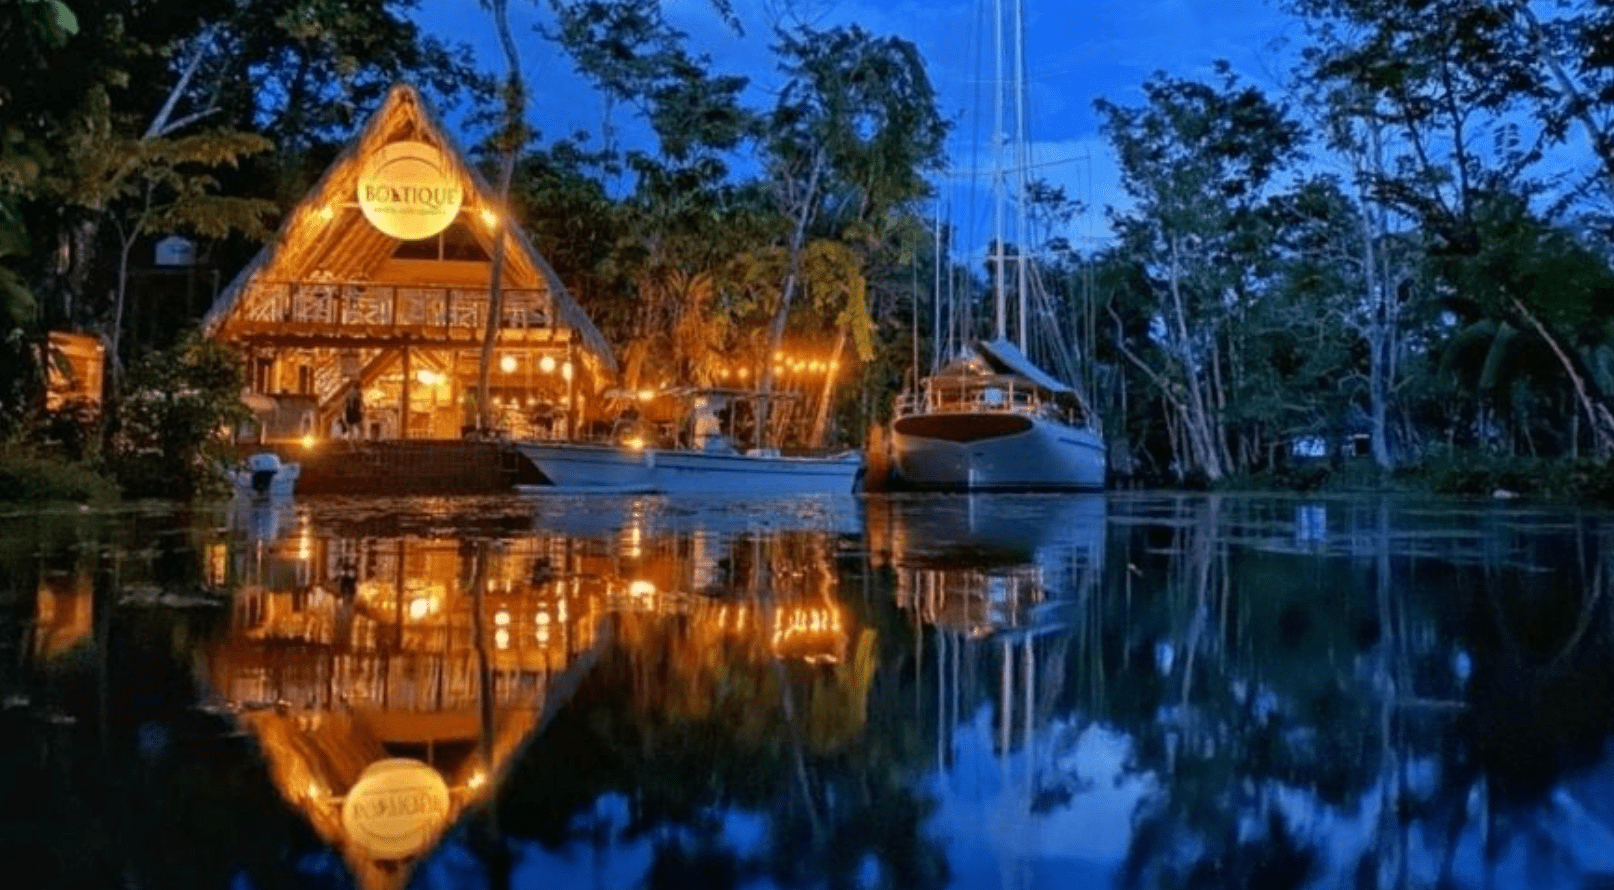 The facade of the jungle lodge Boatique Hotel and Marina at night and next to it, a yacht.